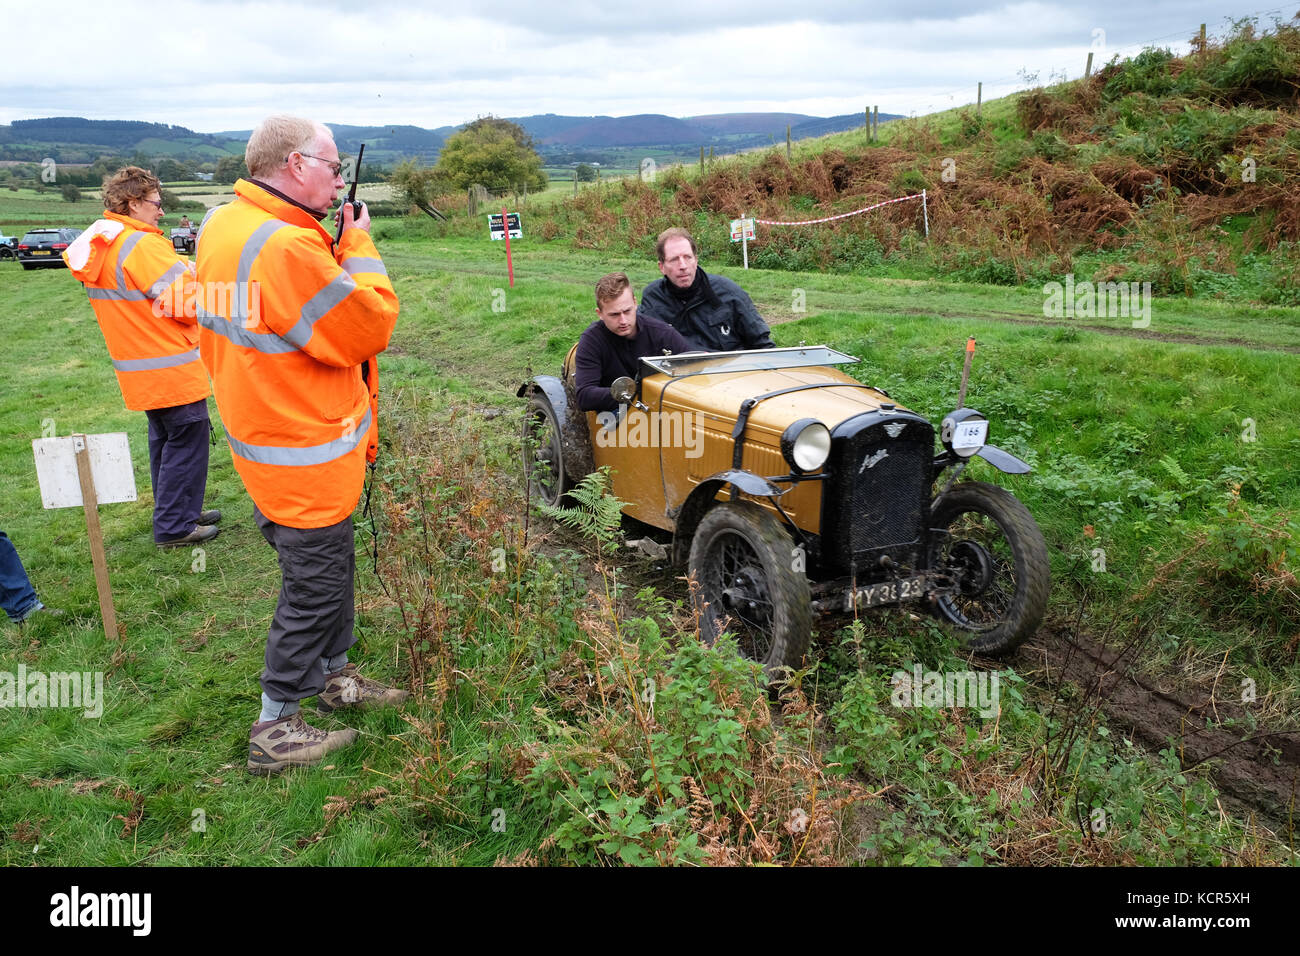 Badlands Farm near Kinnerton, Powys - October 2017 - Vintage Sports Car Club ( VSCC ) Welsh Trial a hill climb event where competitors score points as they progress up a muddy hill climb - Shown here a vintage Austin 7 built in 1930 crossing the start line under the gaze of the competition marshalls on the hill climb. Credit: Steven May/Alamy Live News Stock Photo